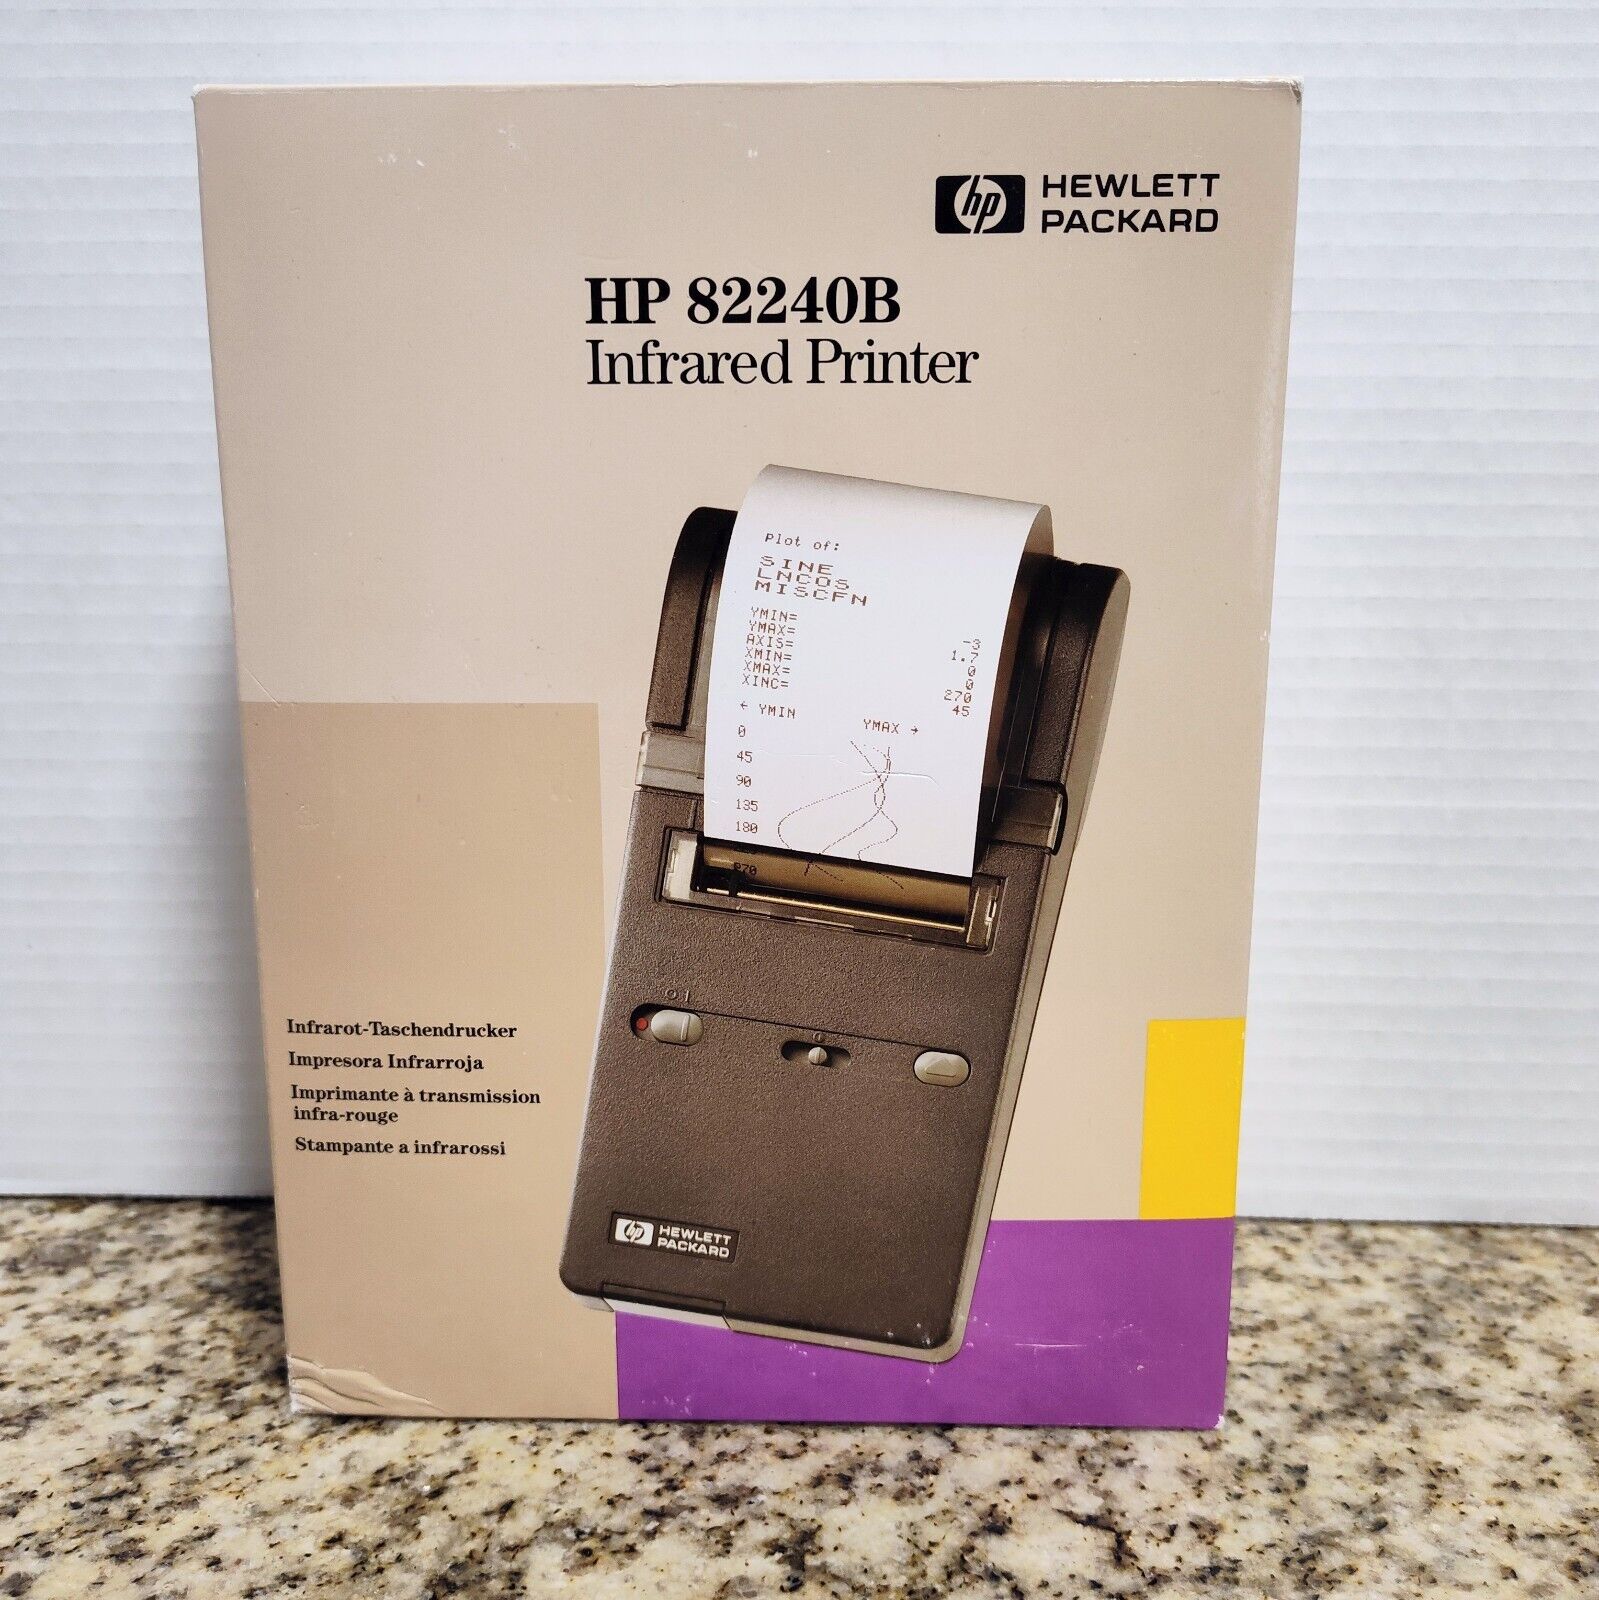 Hewlett Packard HP 82240B Infrared Printer for 48GX with Box Manual VG Cond